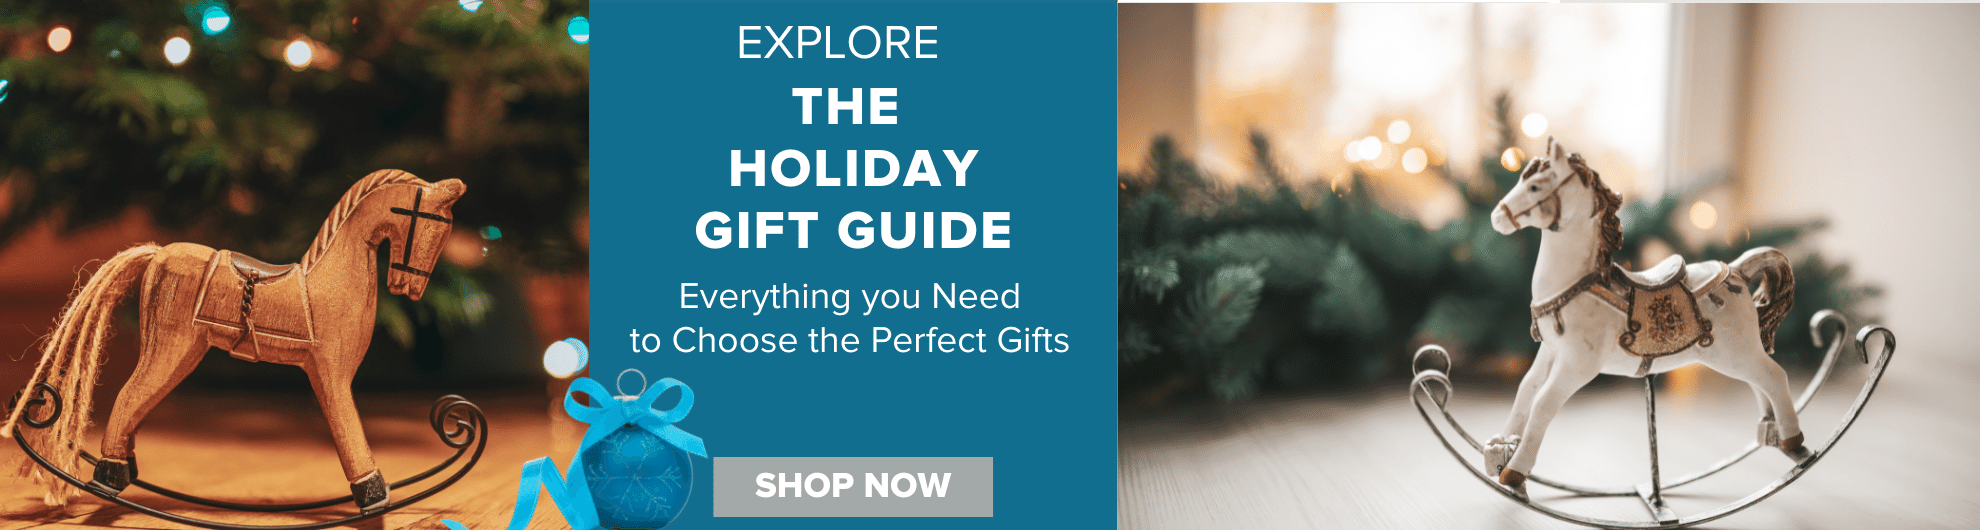 Pick the Perfect Holiday Gifts!